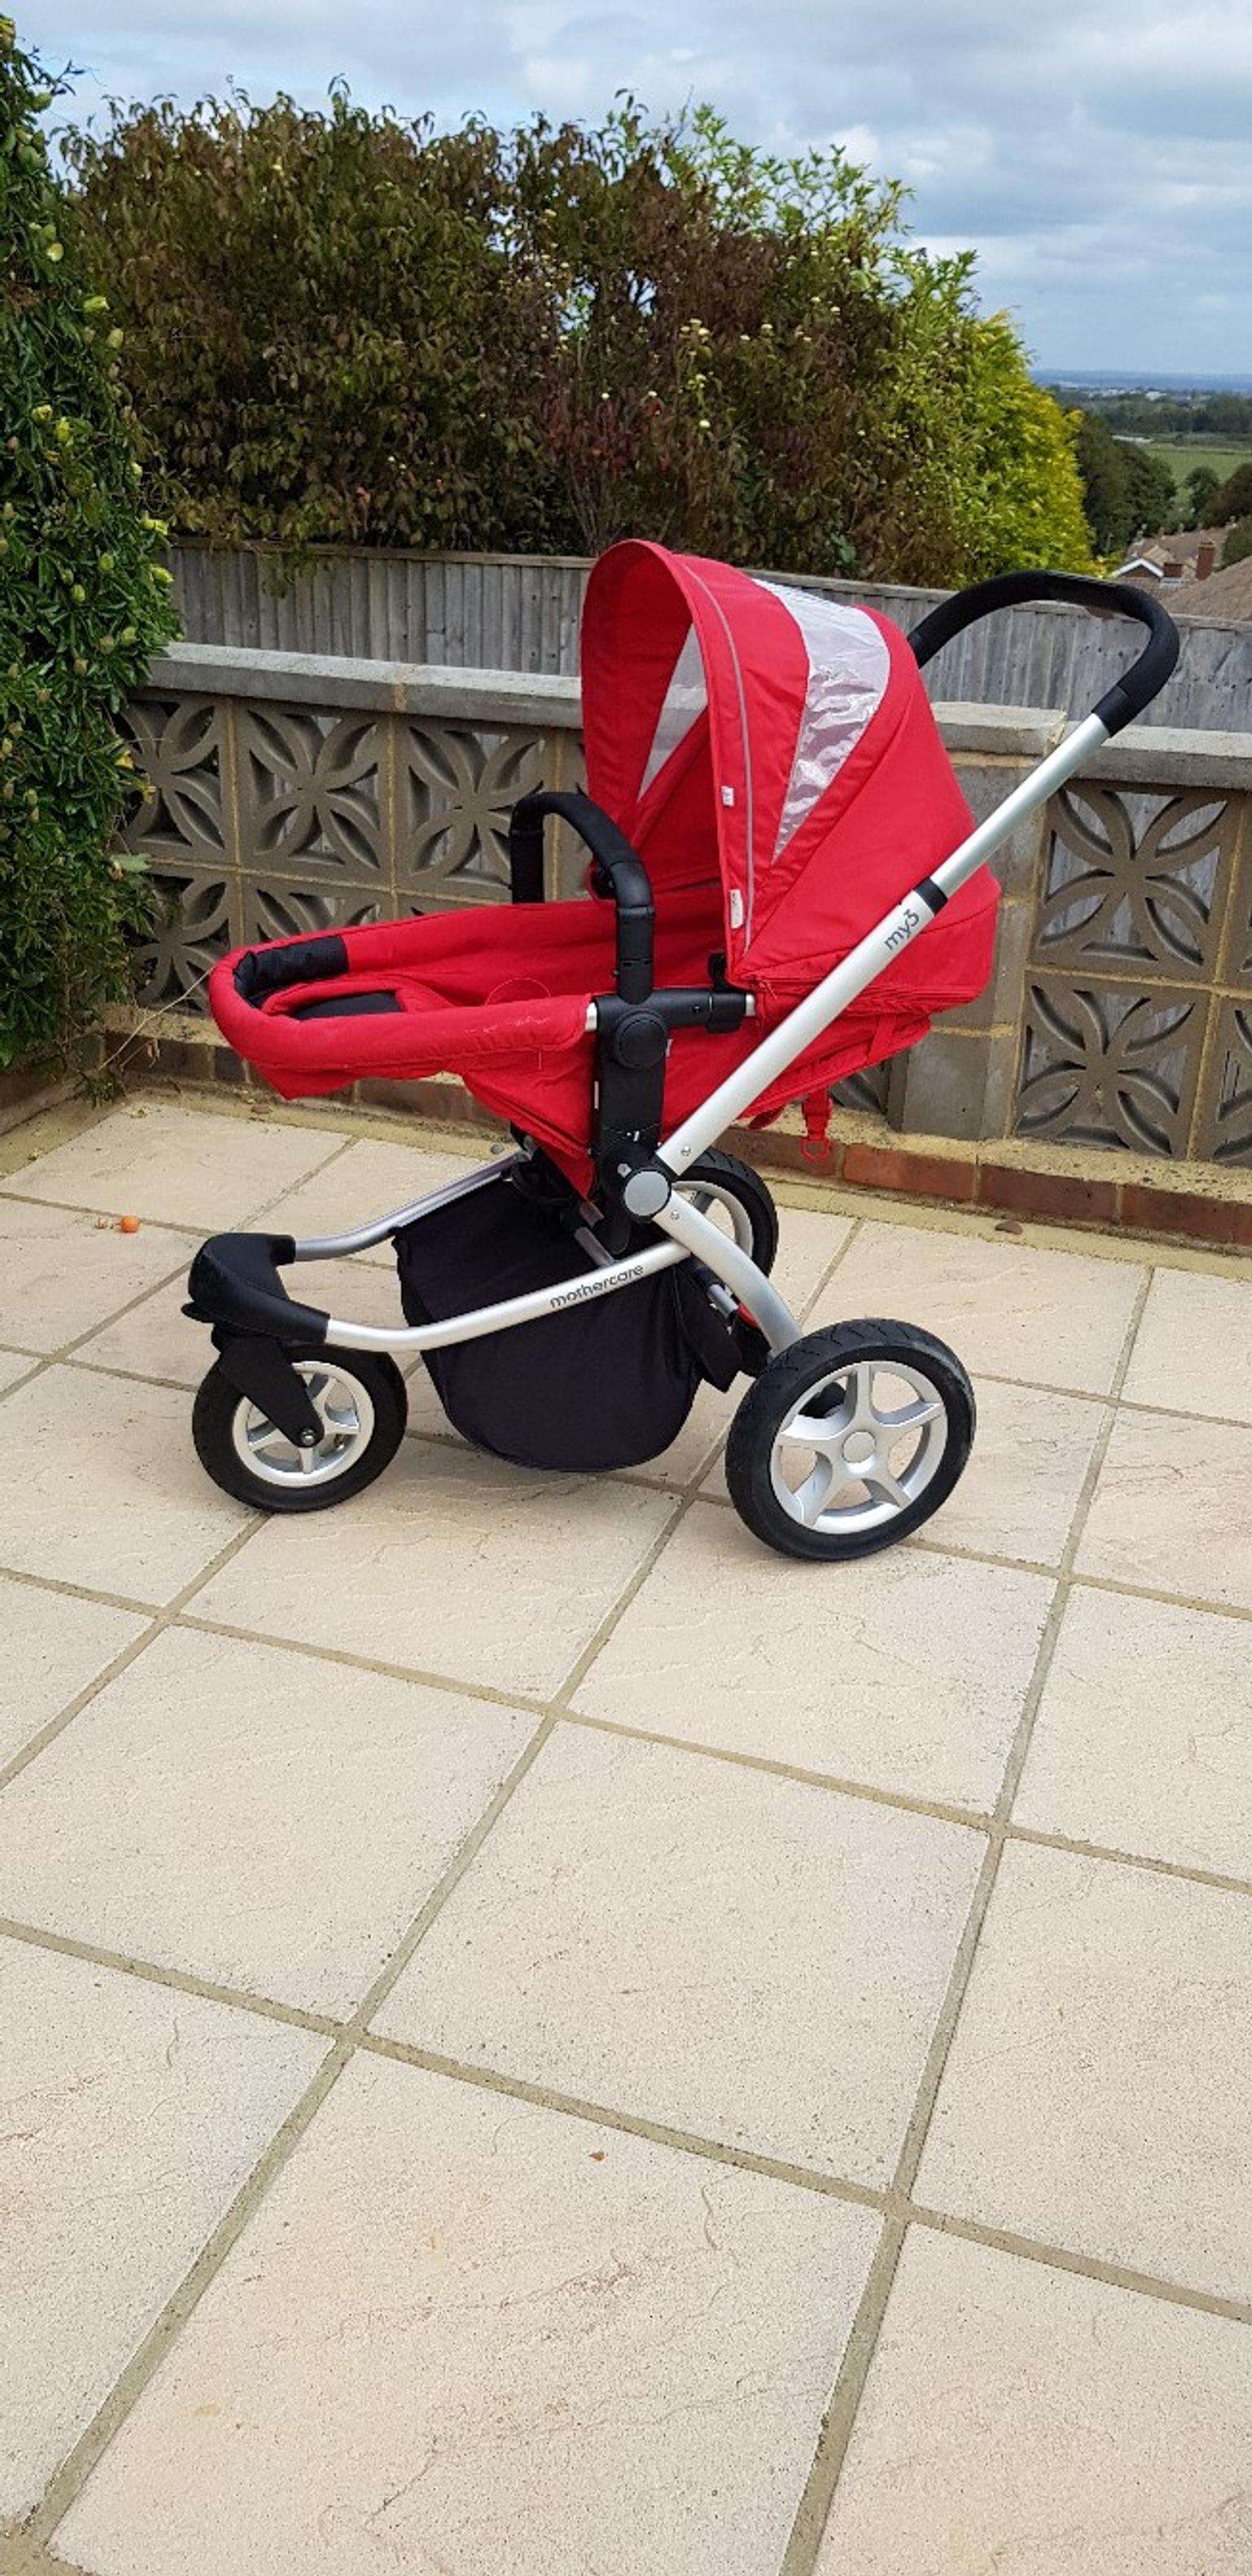 mothercare my3 travel system